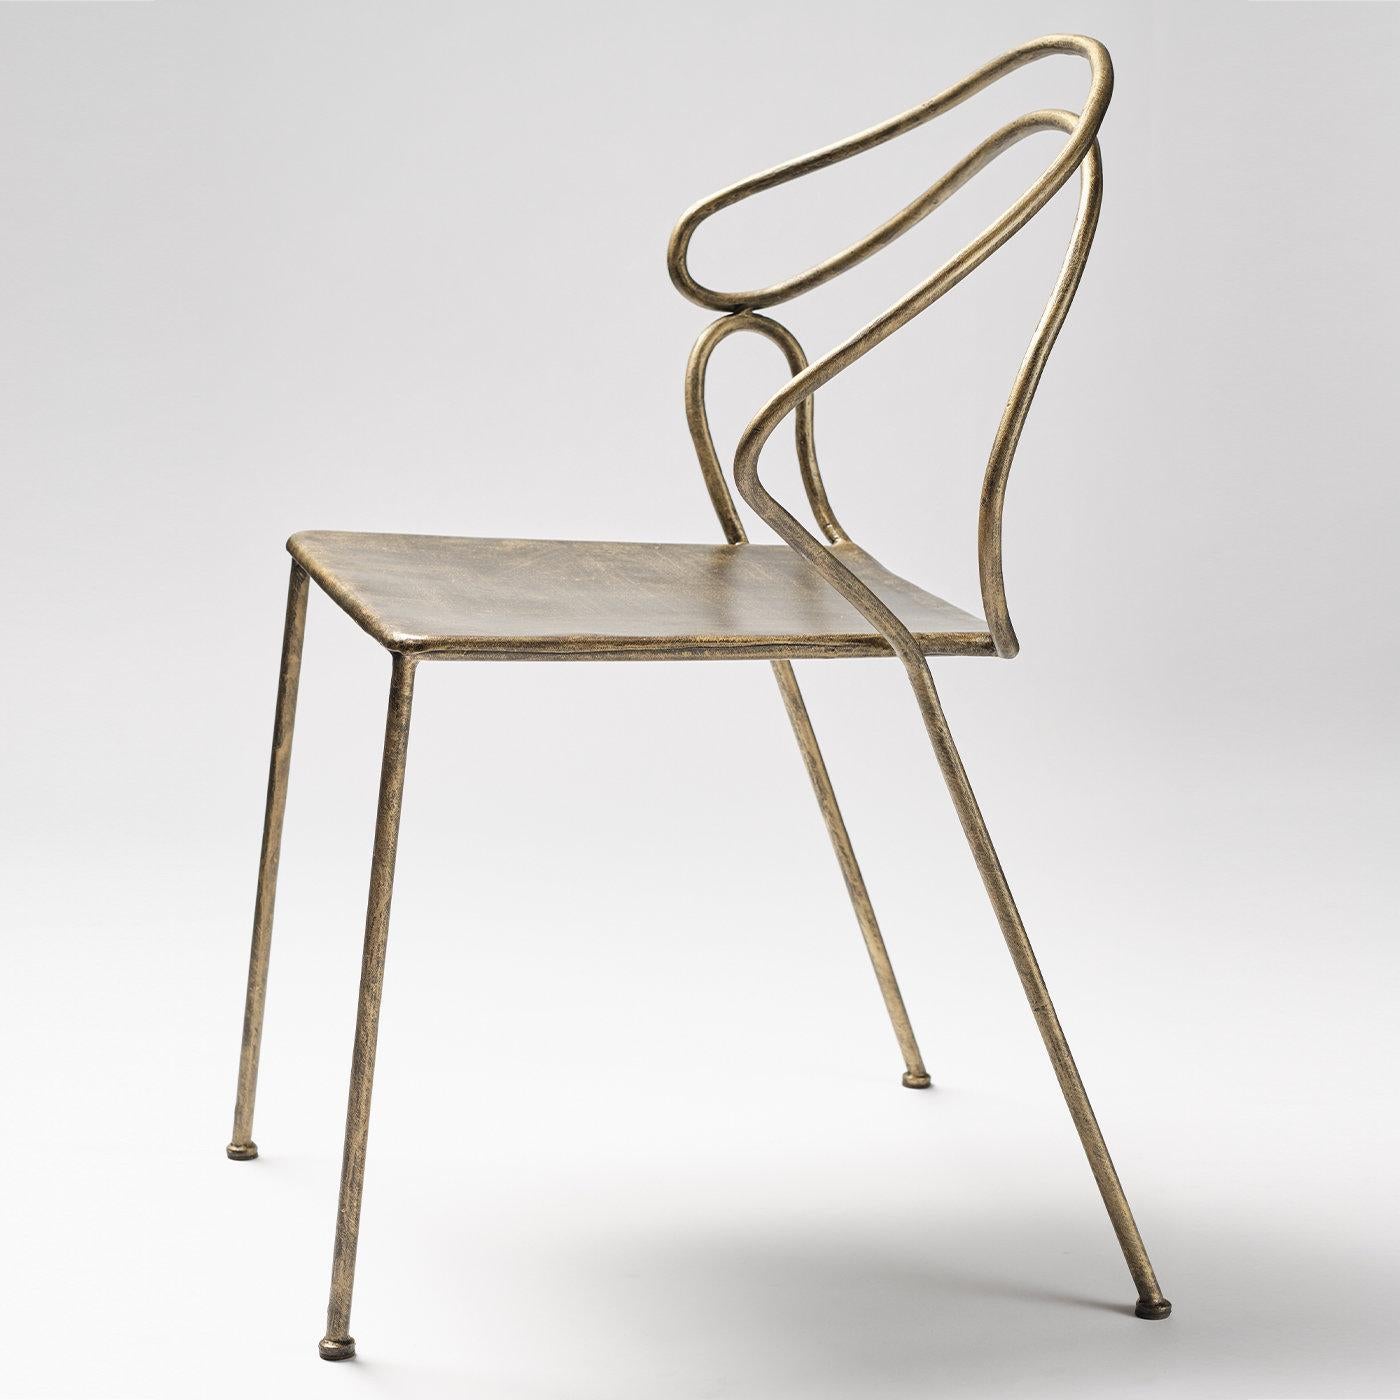 A one-of-a-kind sculptural design piece of vintage inspiration, this gorgeous chair by Antonio Saporito will infuse an iconic charm in any room of a contemporary interior. Defined by a soft and sinuous profile that harmoniously merge every single